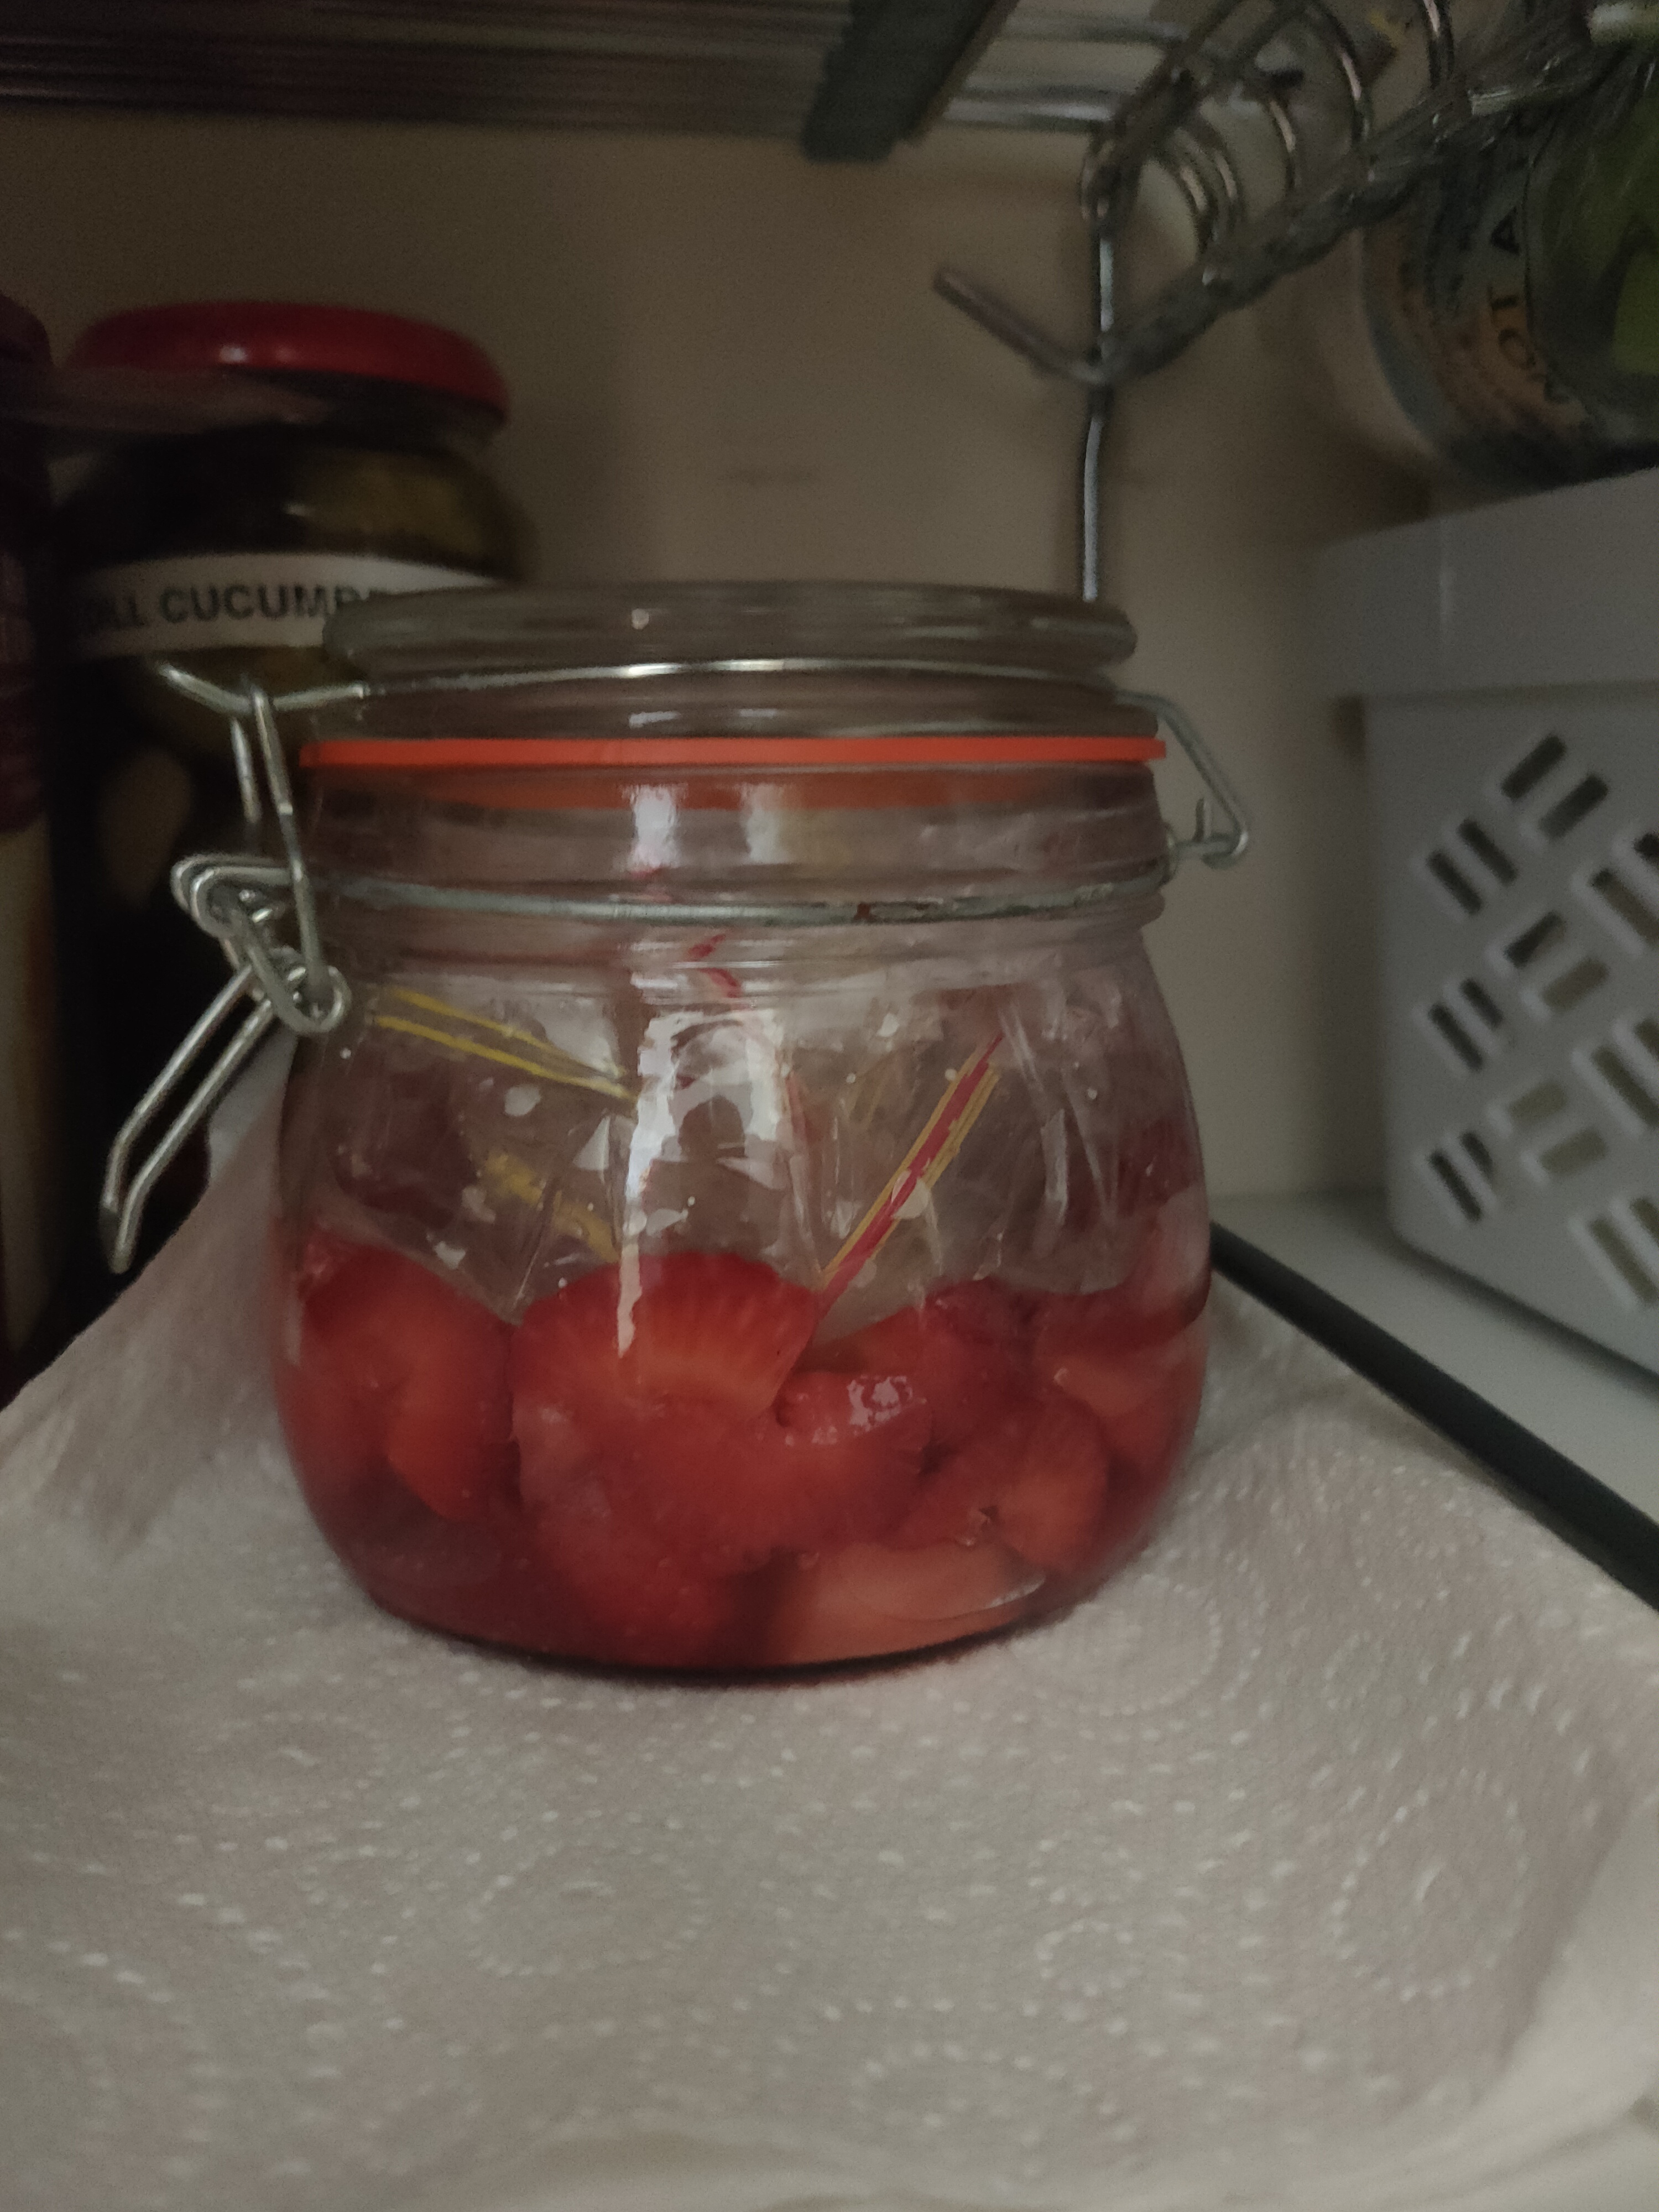 Chopped strawberries in a jar on day 1